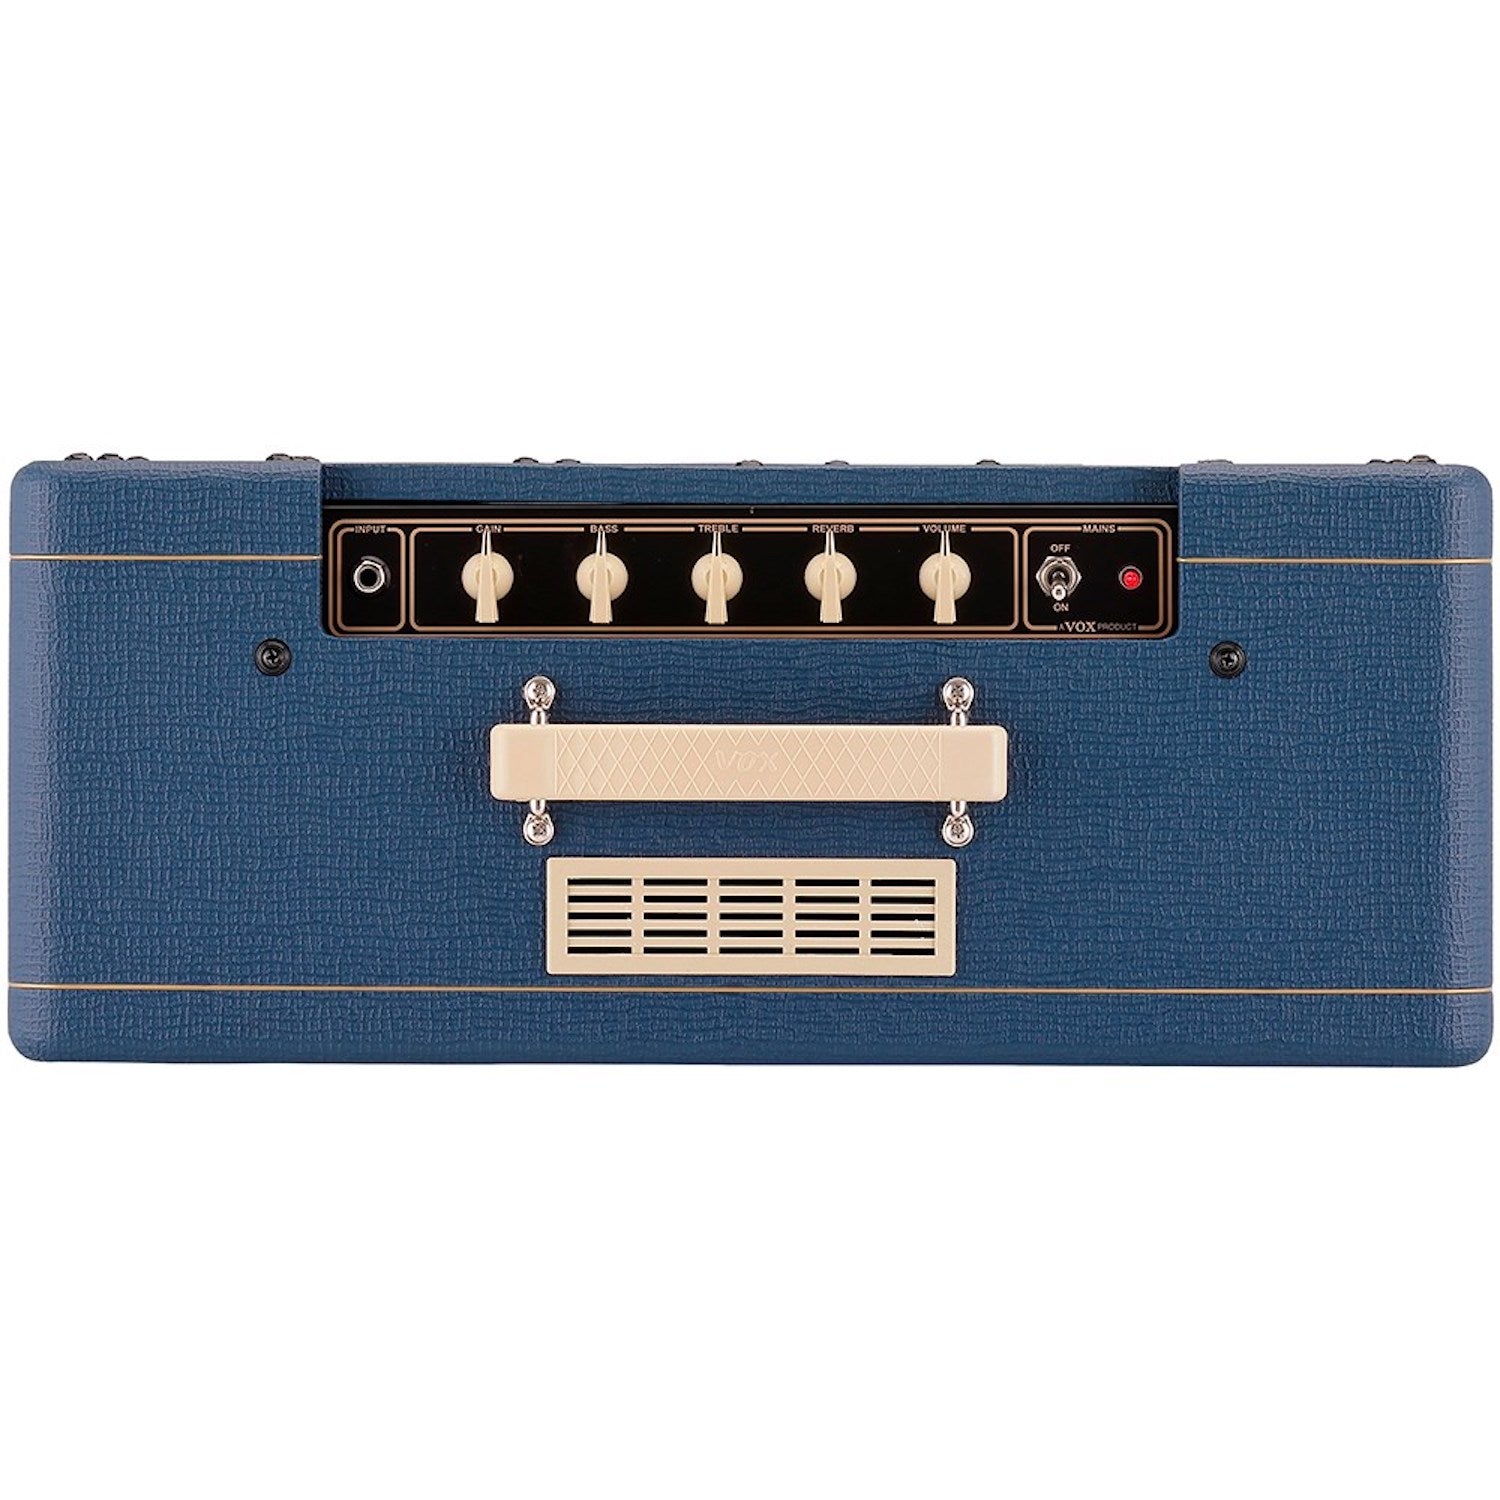 Vox AC10C1-RB Limited Edition 1x10" Guitar Amp Combo-Rich Blue